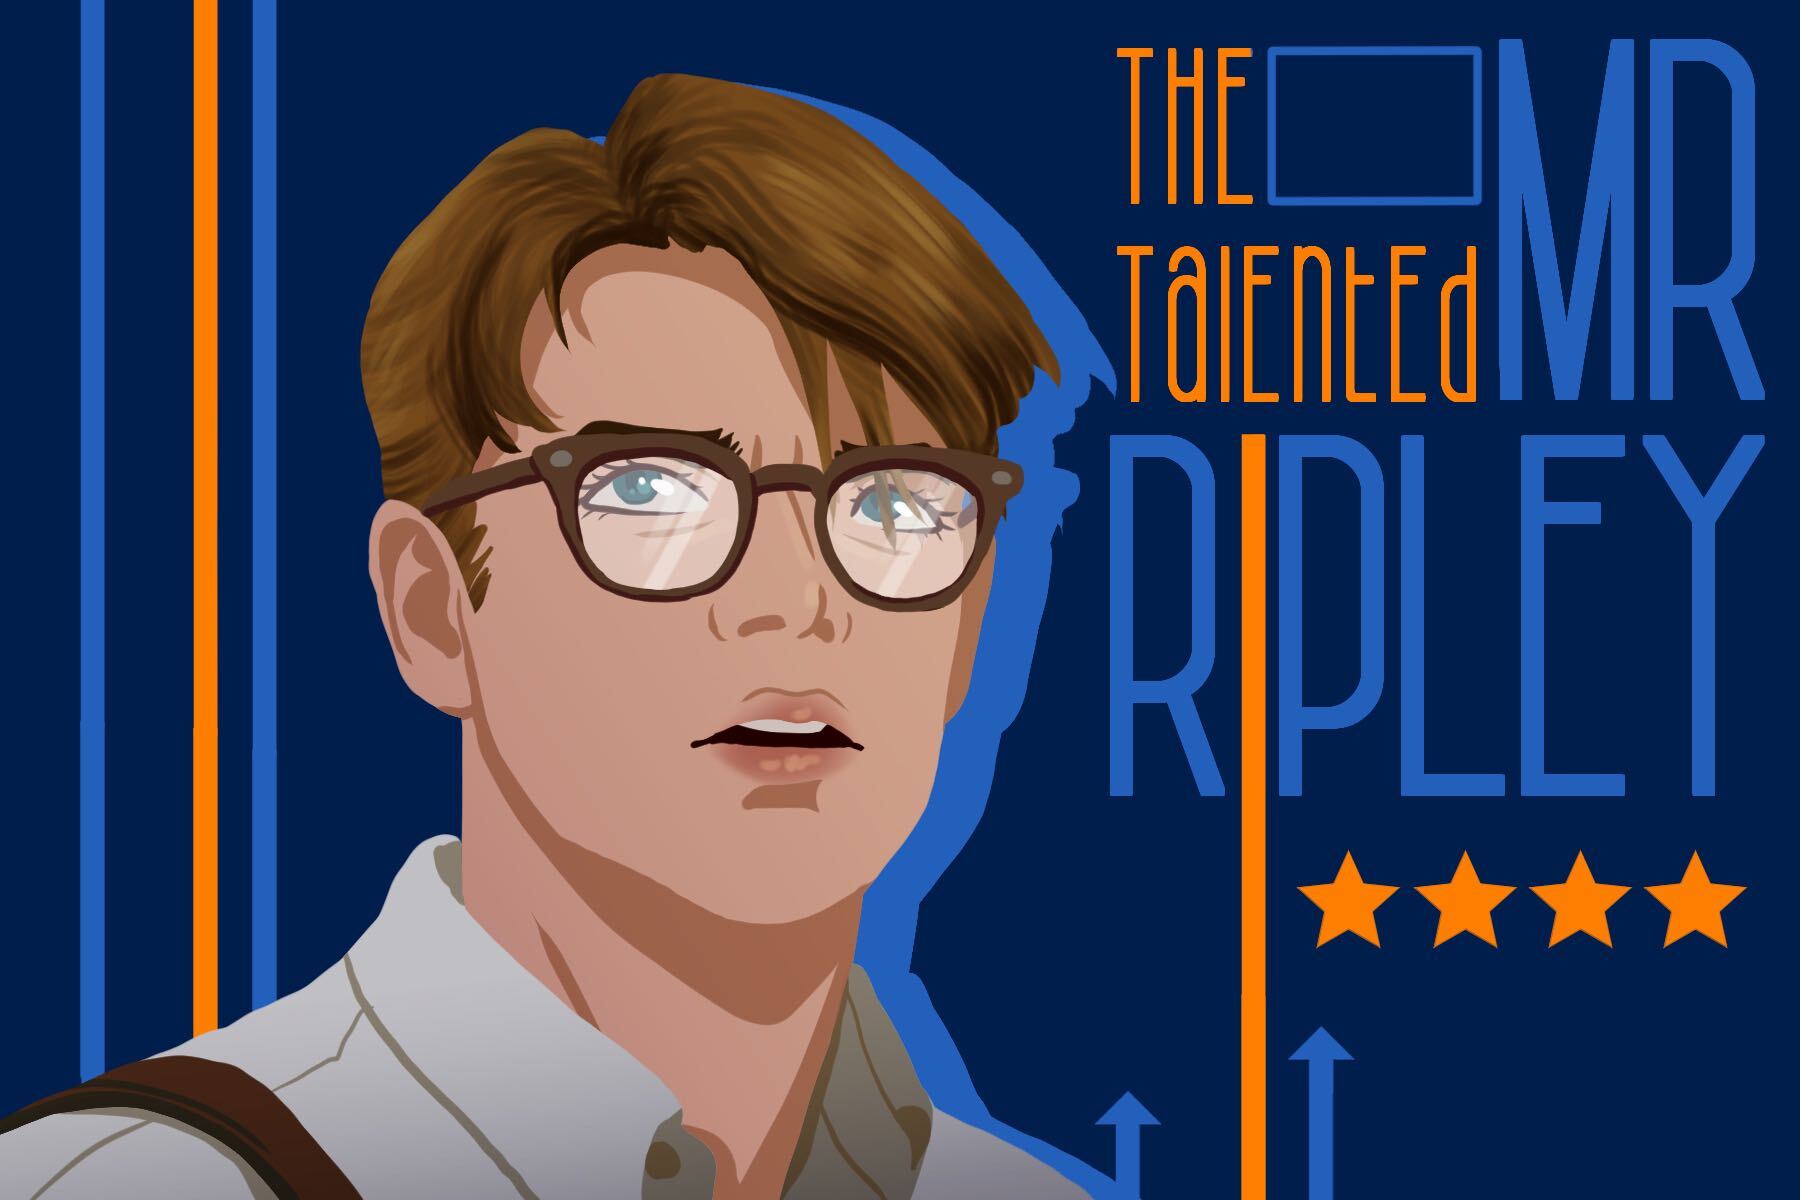 an illustration of the protagonist of the talented mr ripley